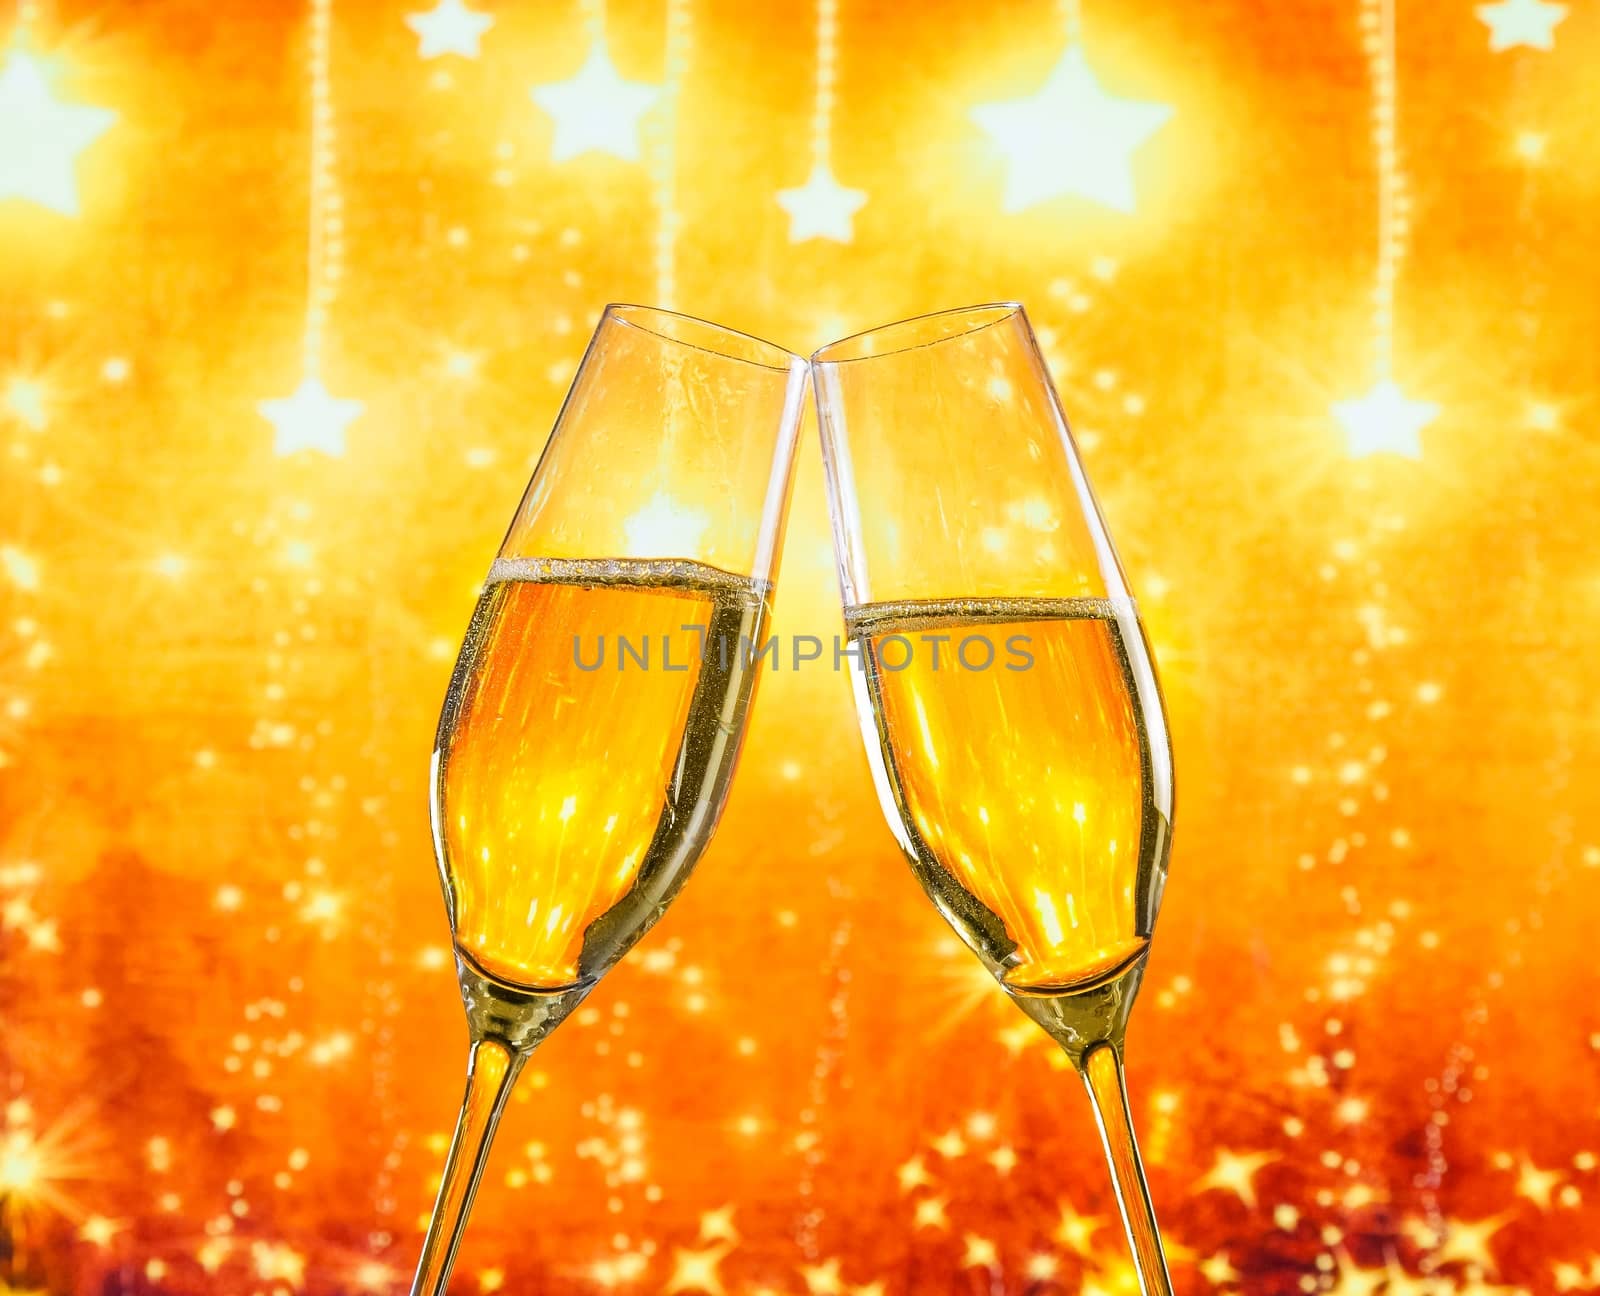 a pair of champagne flutes with golden bubbles make cheers on golden stars light background with space for text